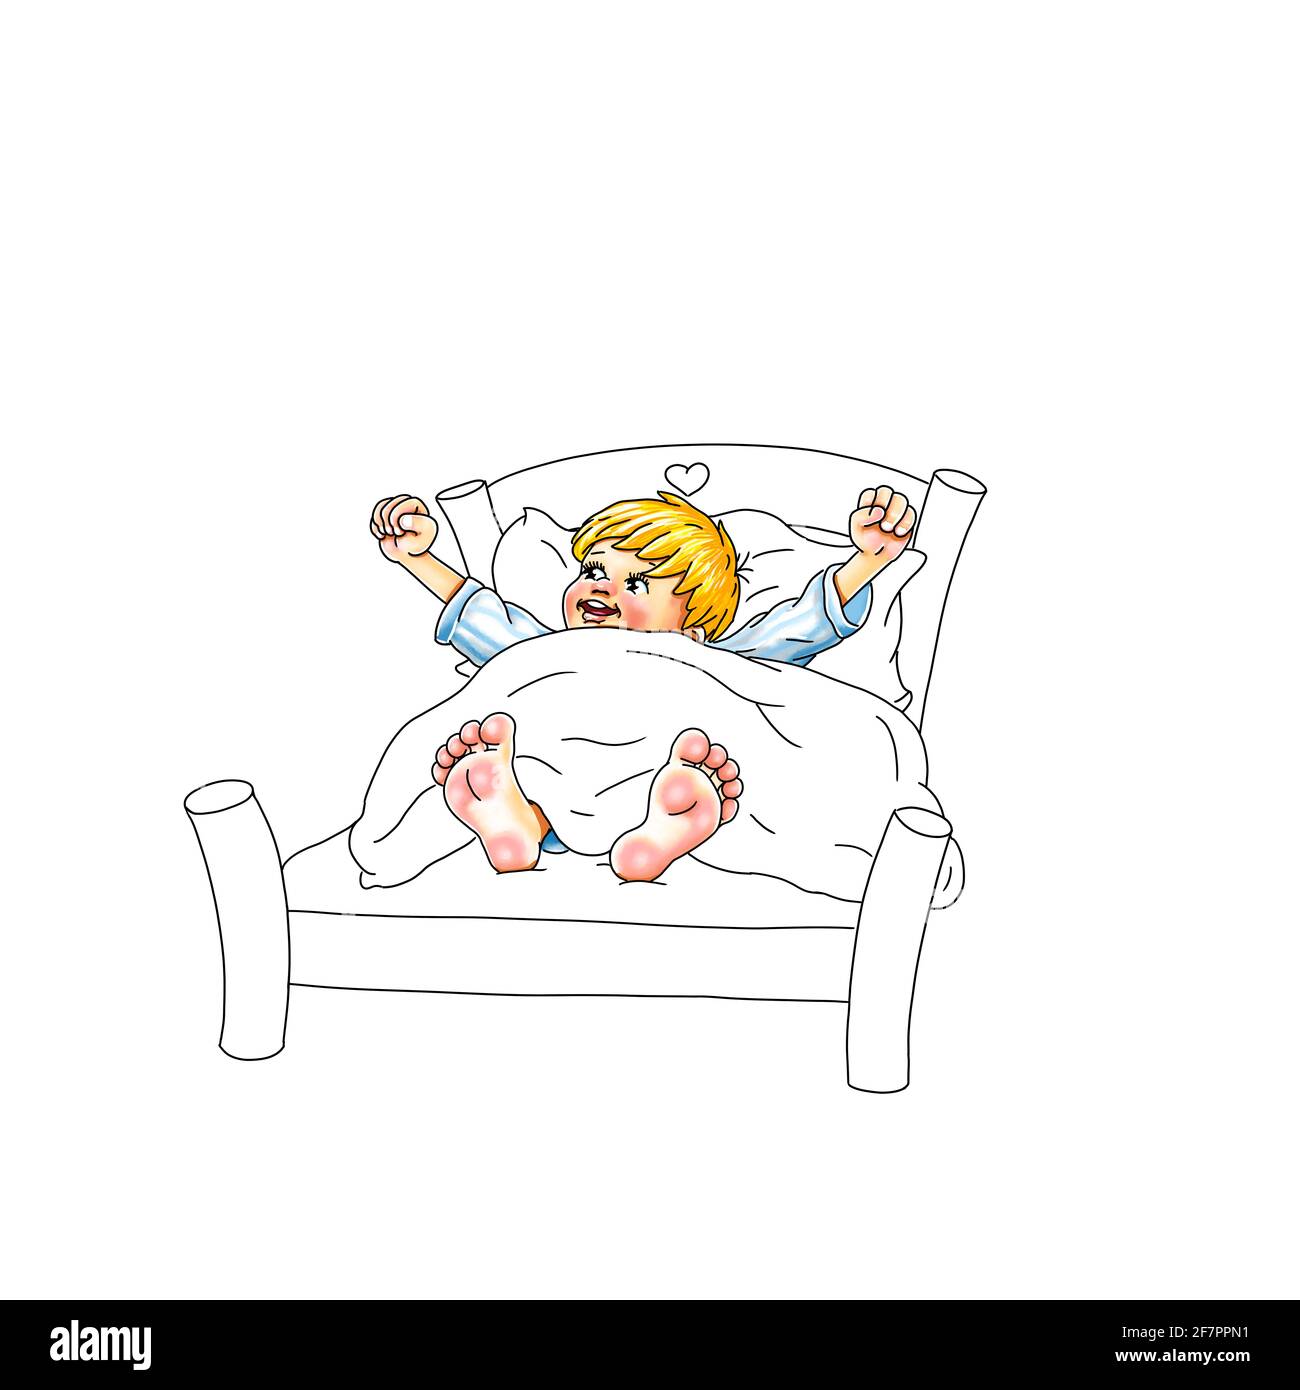 early in the morning coloring picture children's room boy bed stretch wake up barefoot feet sleep awaken new earth laugh smile blue yellow children's Stock Photo